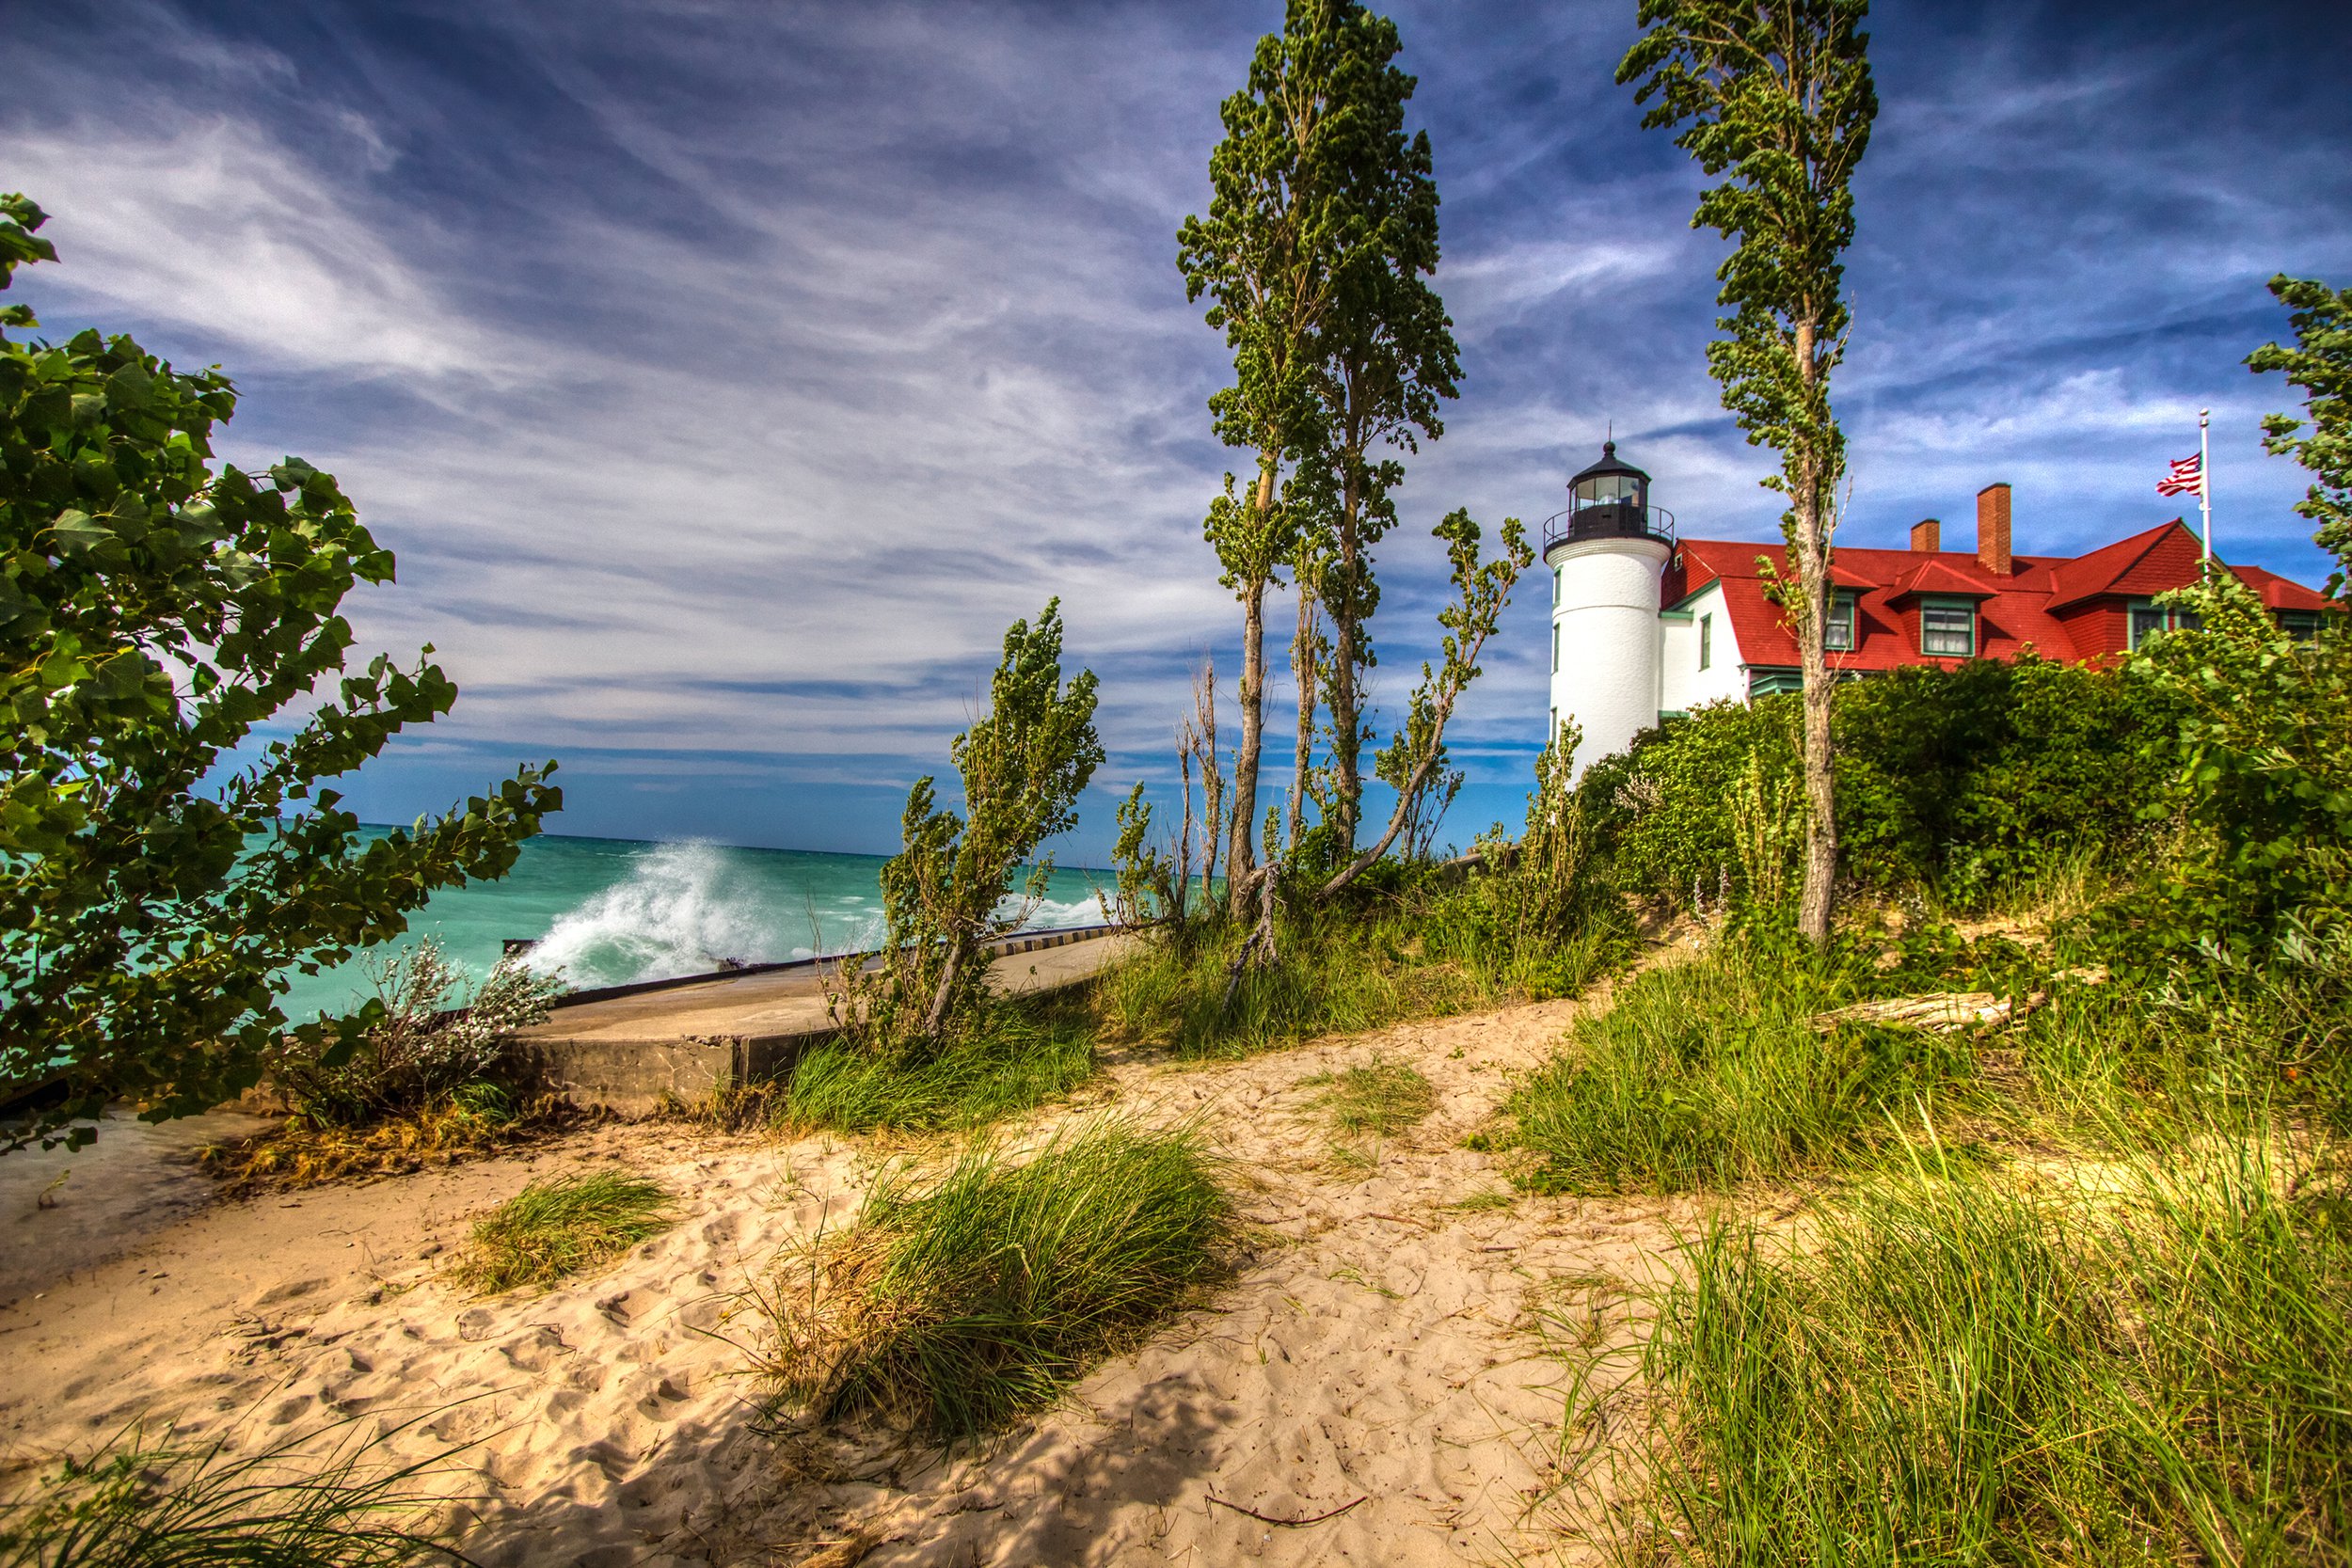 <p><a href="https://www.nps.gov/slbe/index.htm">Sleeping Bear Dunes National Park</a> offers fun for children and parents alike. Climb, roll, and sled down the sandy embankments, then go for a dip in Lake Michigan. Entrance to the National Park is $25 a vehicle for a 7-day permit. Keep other costs in check with our <a href="https://blog.cheapism.com/cheap-national-park-vacations/">money-saving tips for visiting national parks</a>. </p>